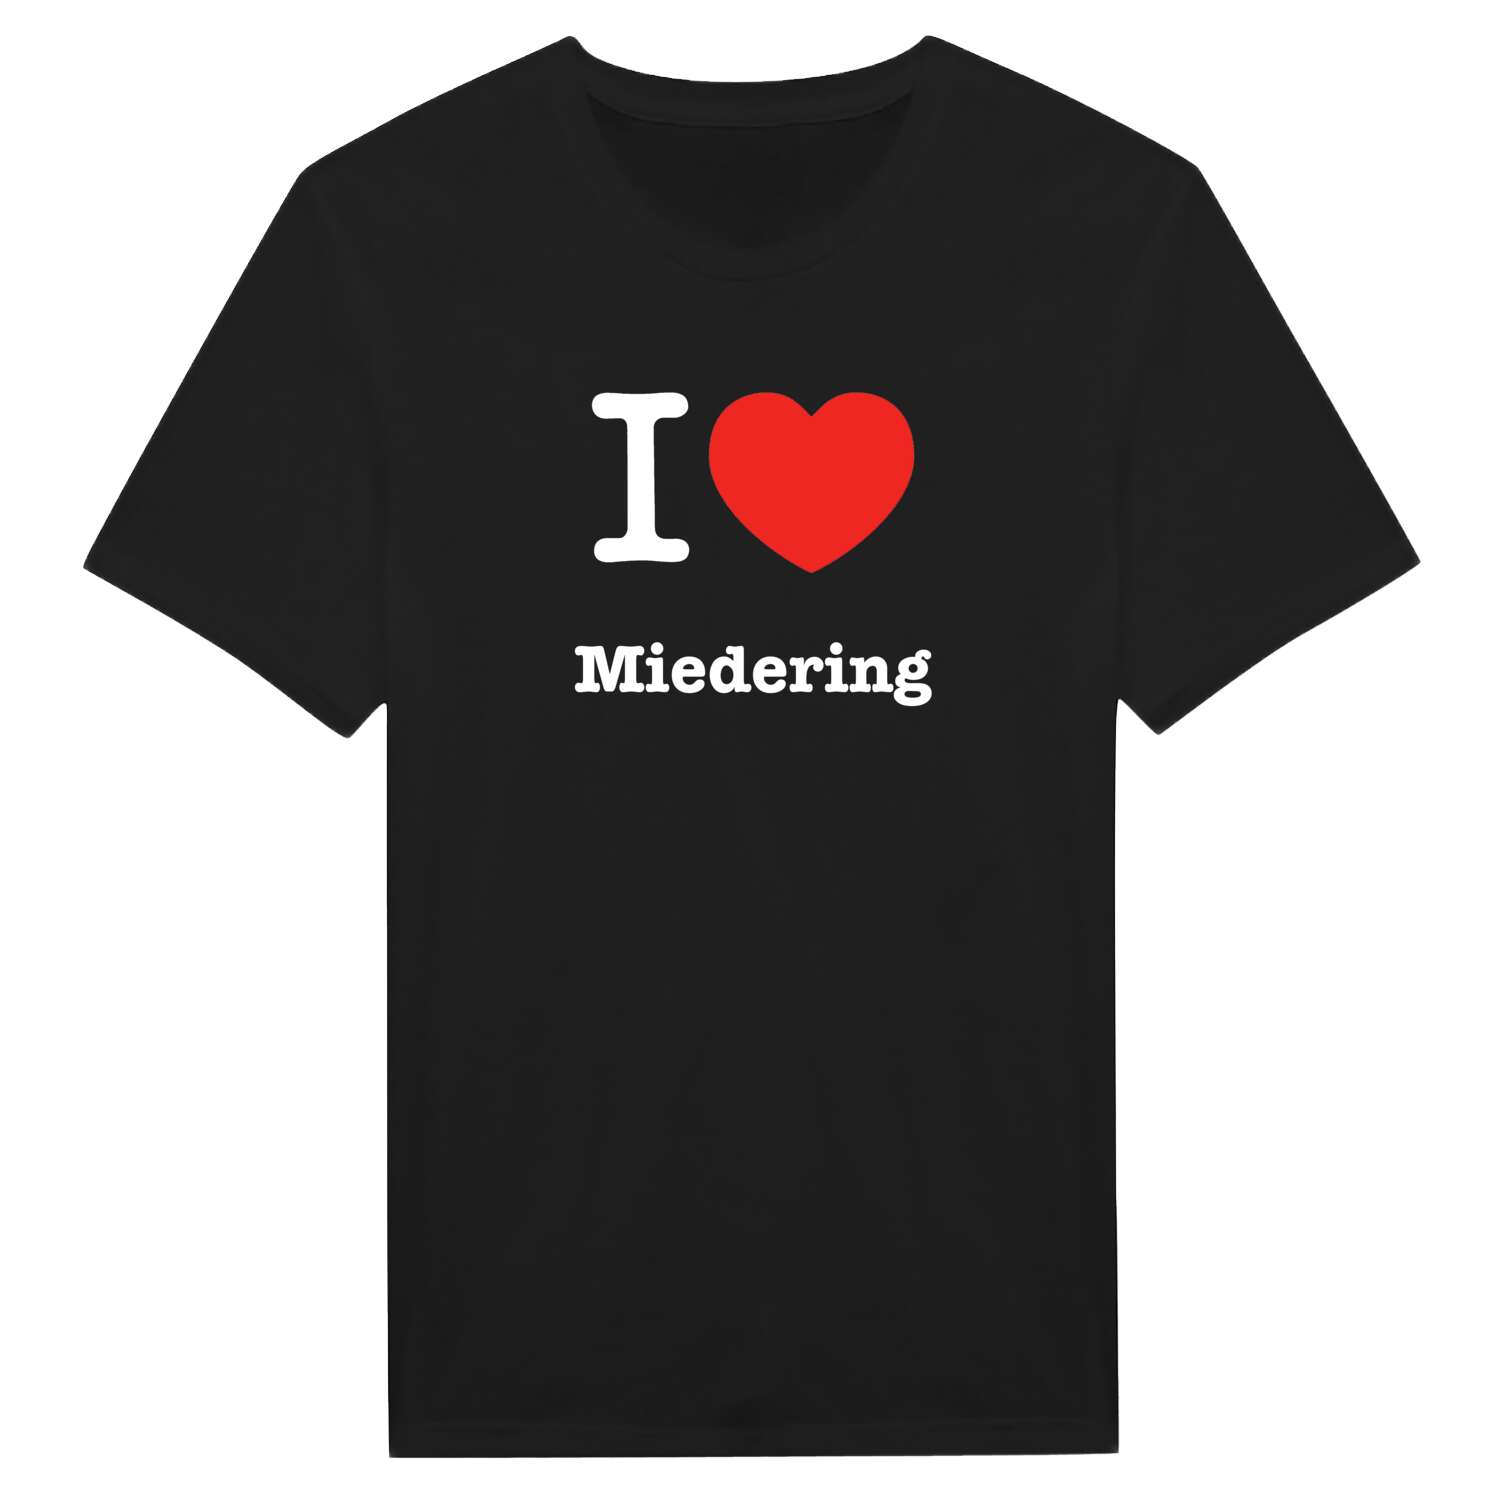 Miedering T-Shirt »I love«